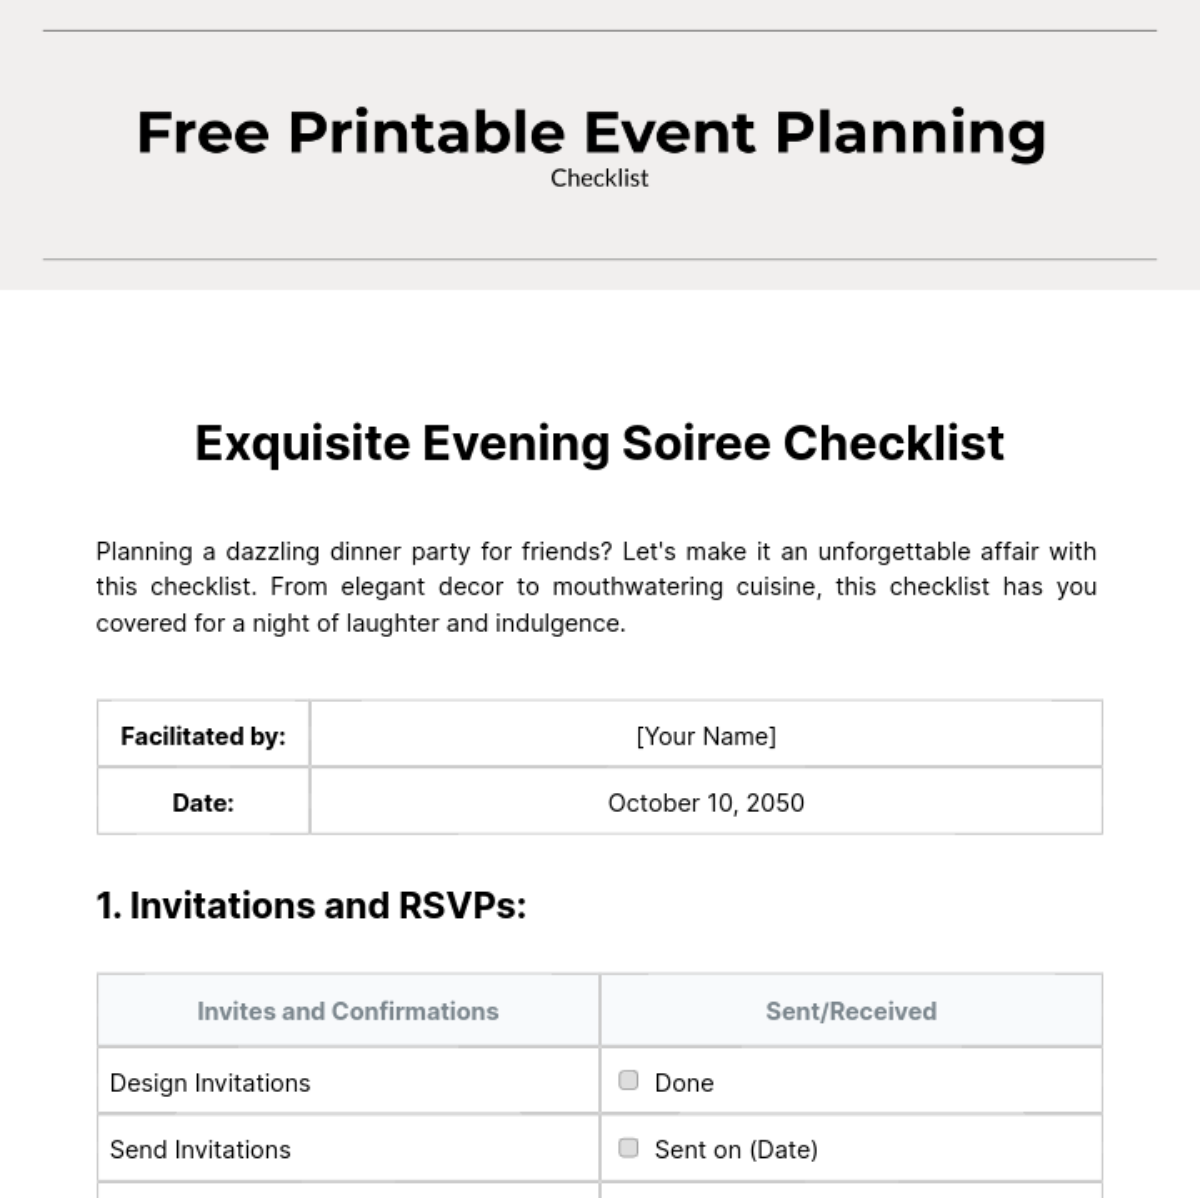 Free Printable Event Planning Checklist Template